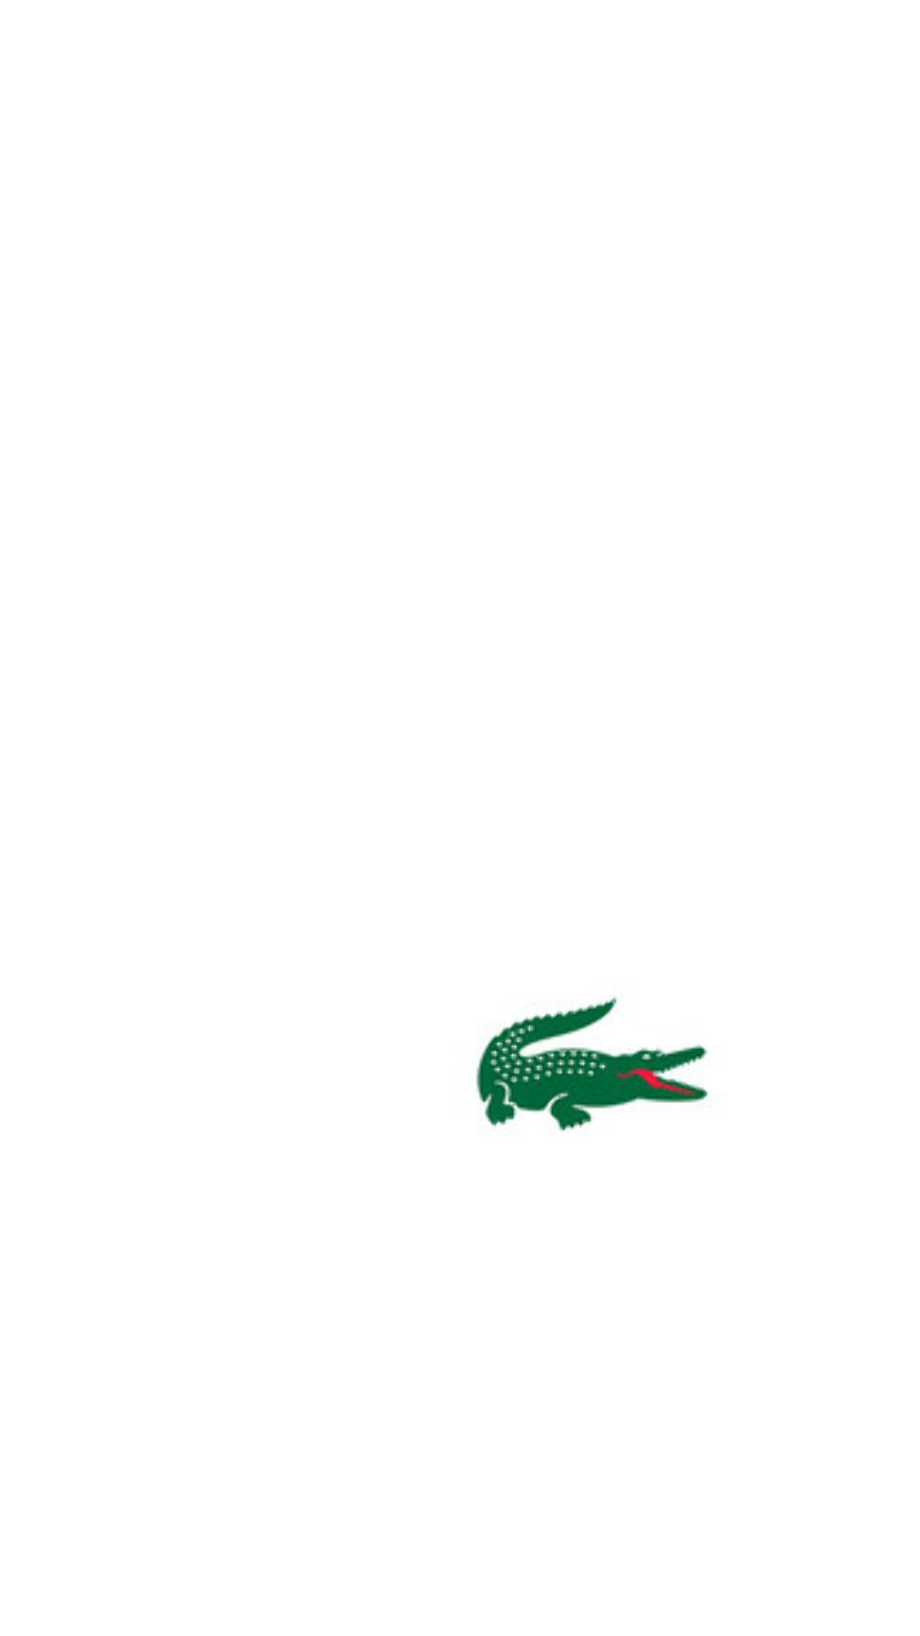 Download High Quality lacoste logo hd wallpaper Transparent PNG Images